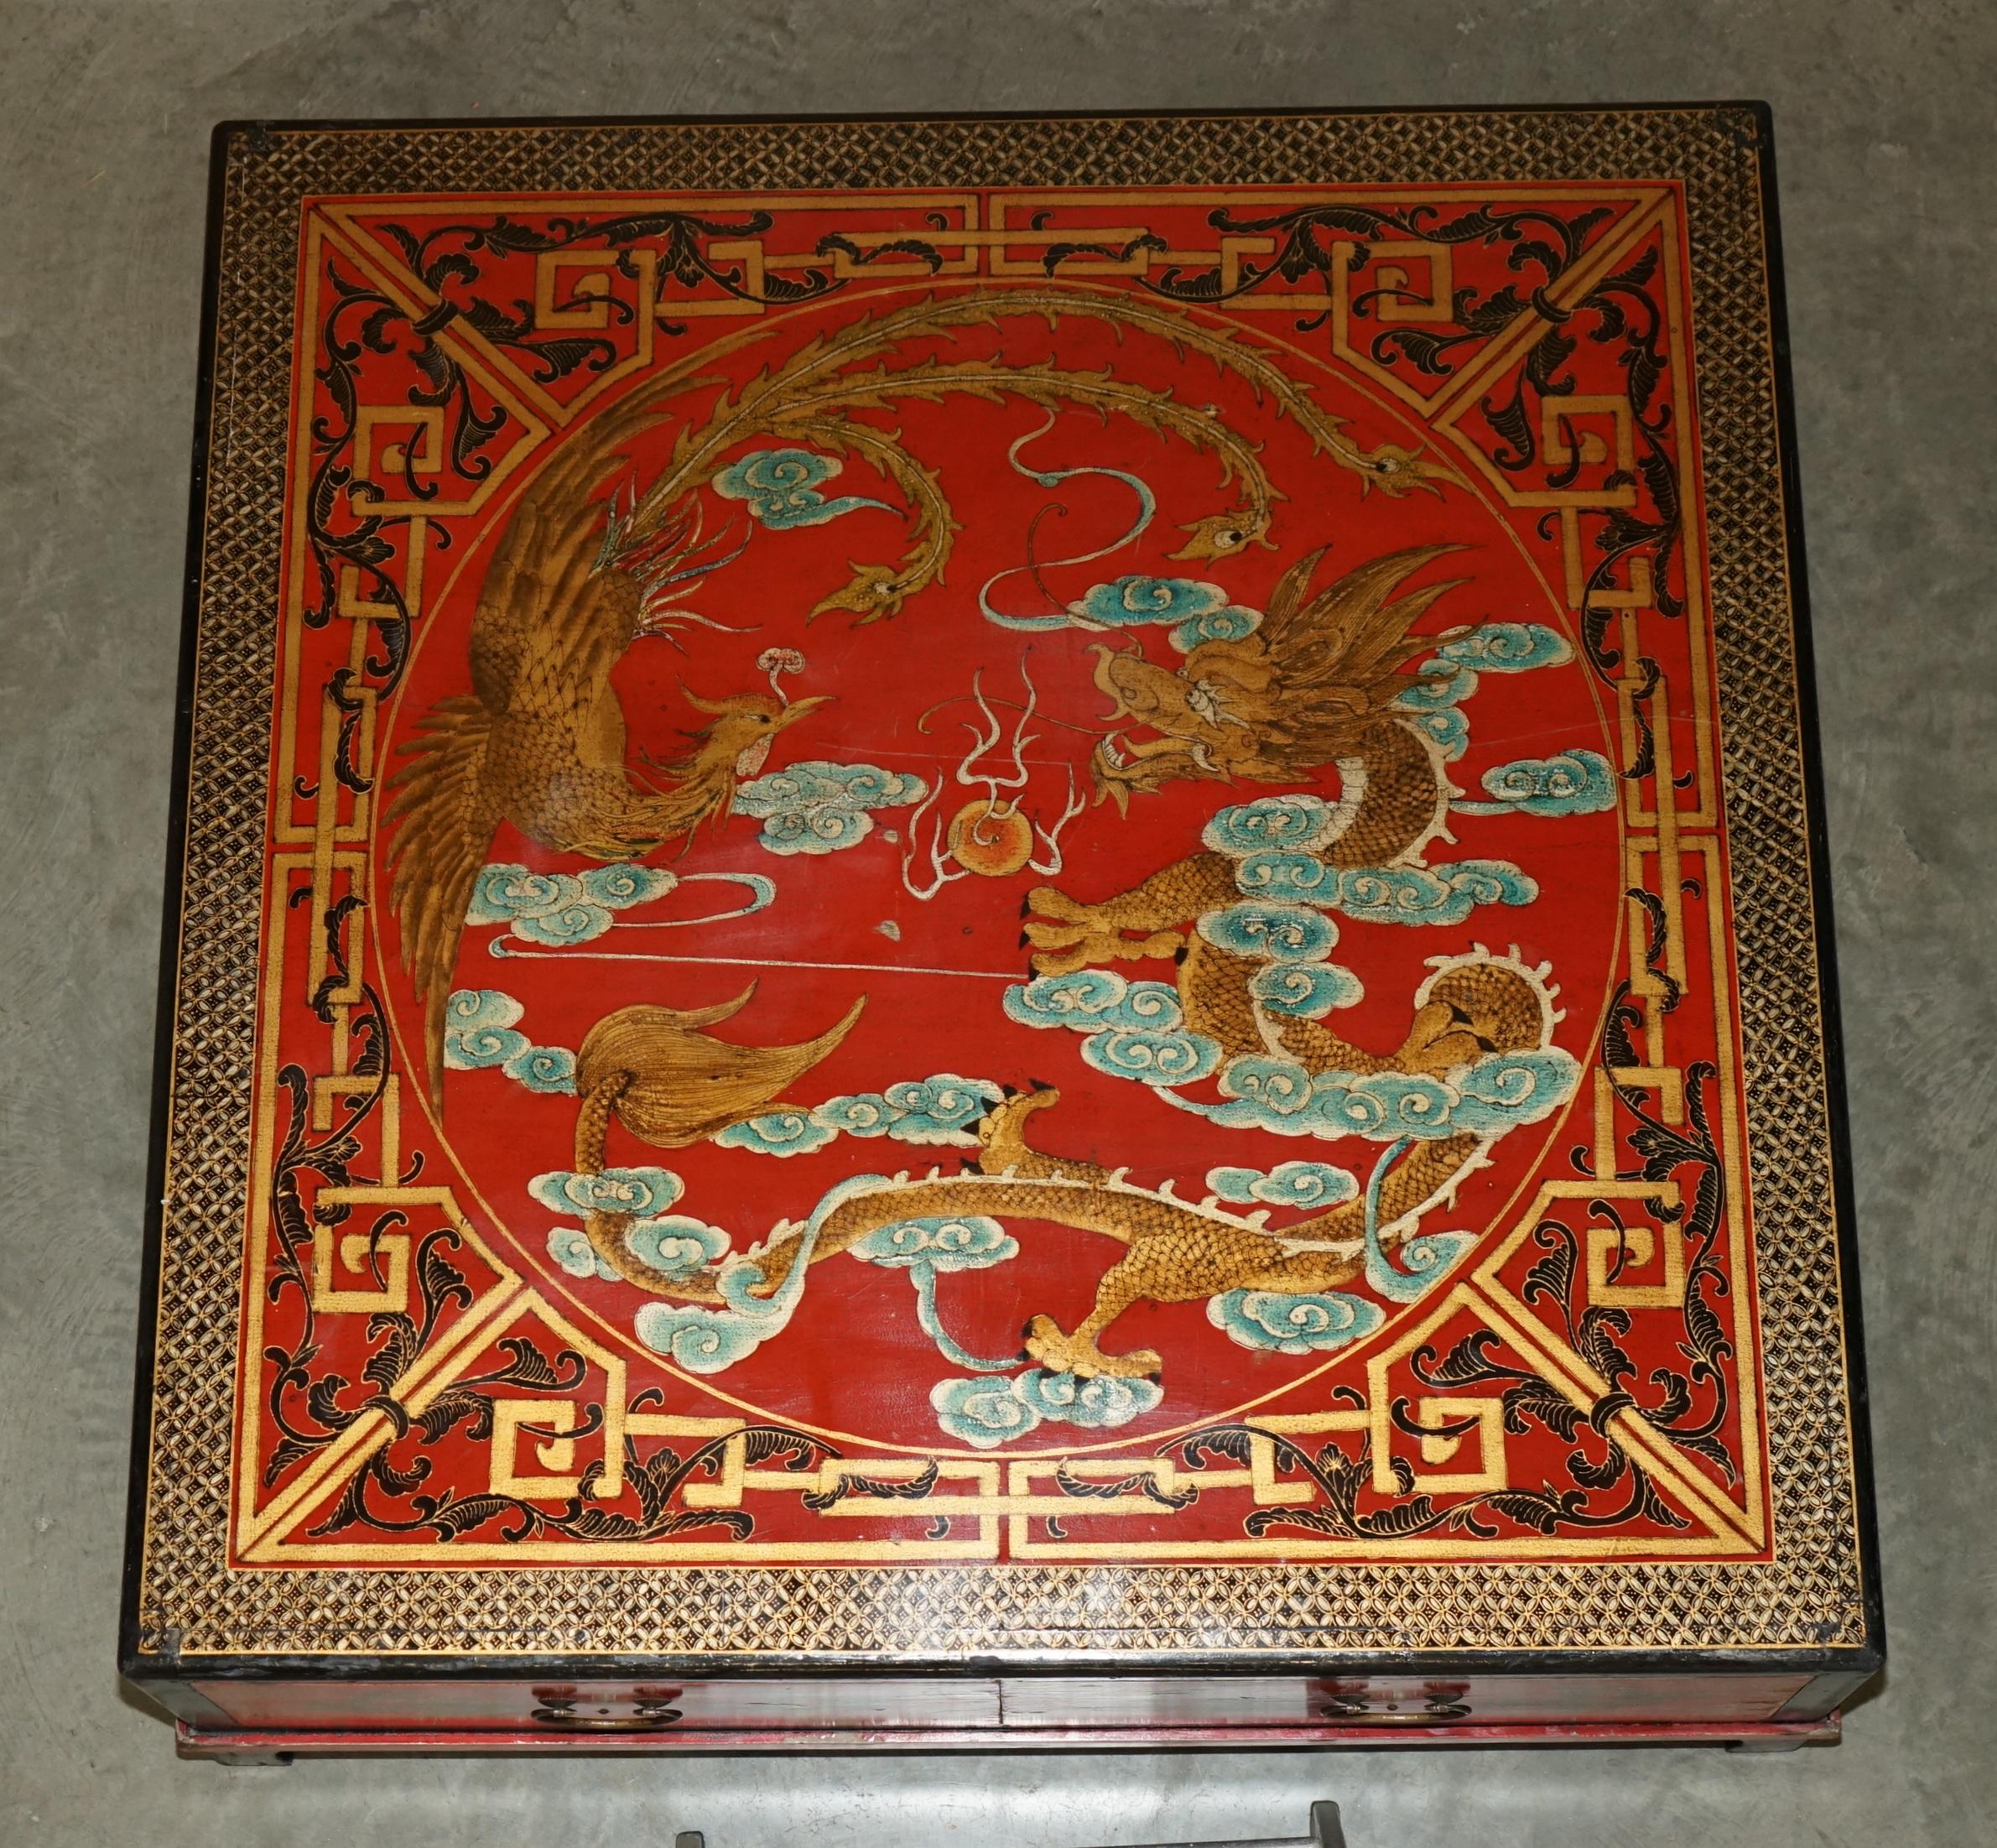 Hand-Crafted LARGE ANTIQUE CIRCA 1920 CHiNESE DRAGON CHINOISERIE EXPORT COFFEE TABLE DRAWERS For Sale